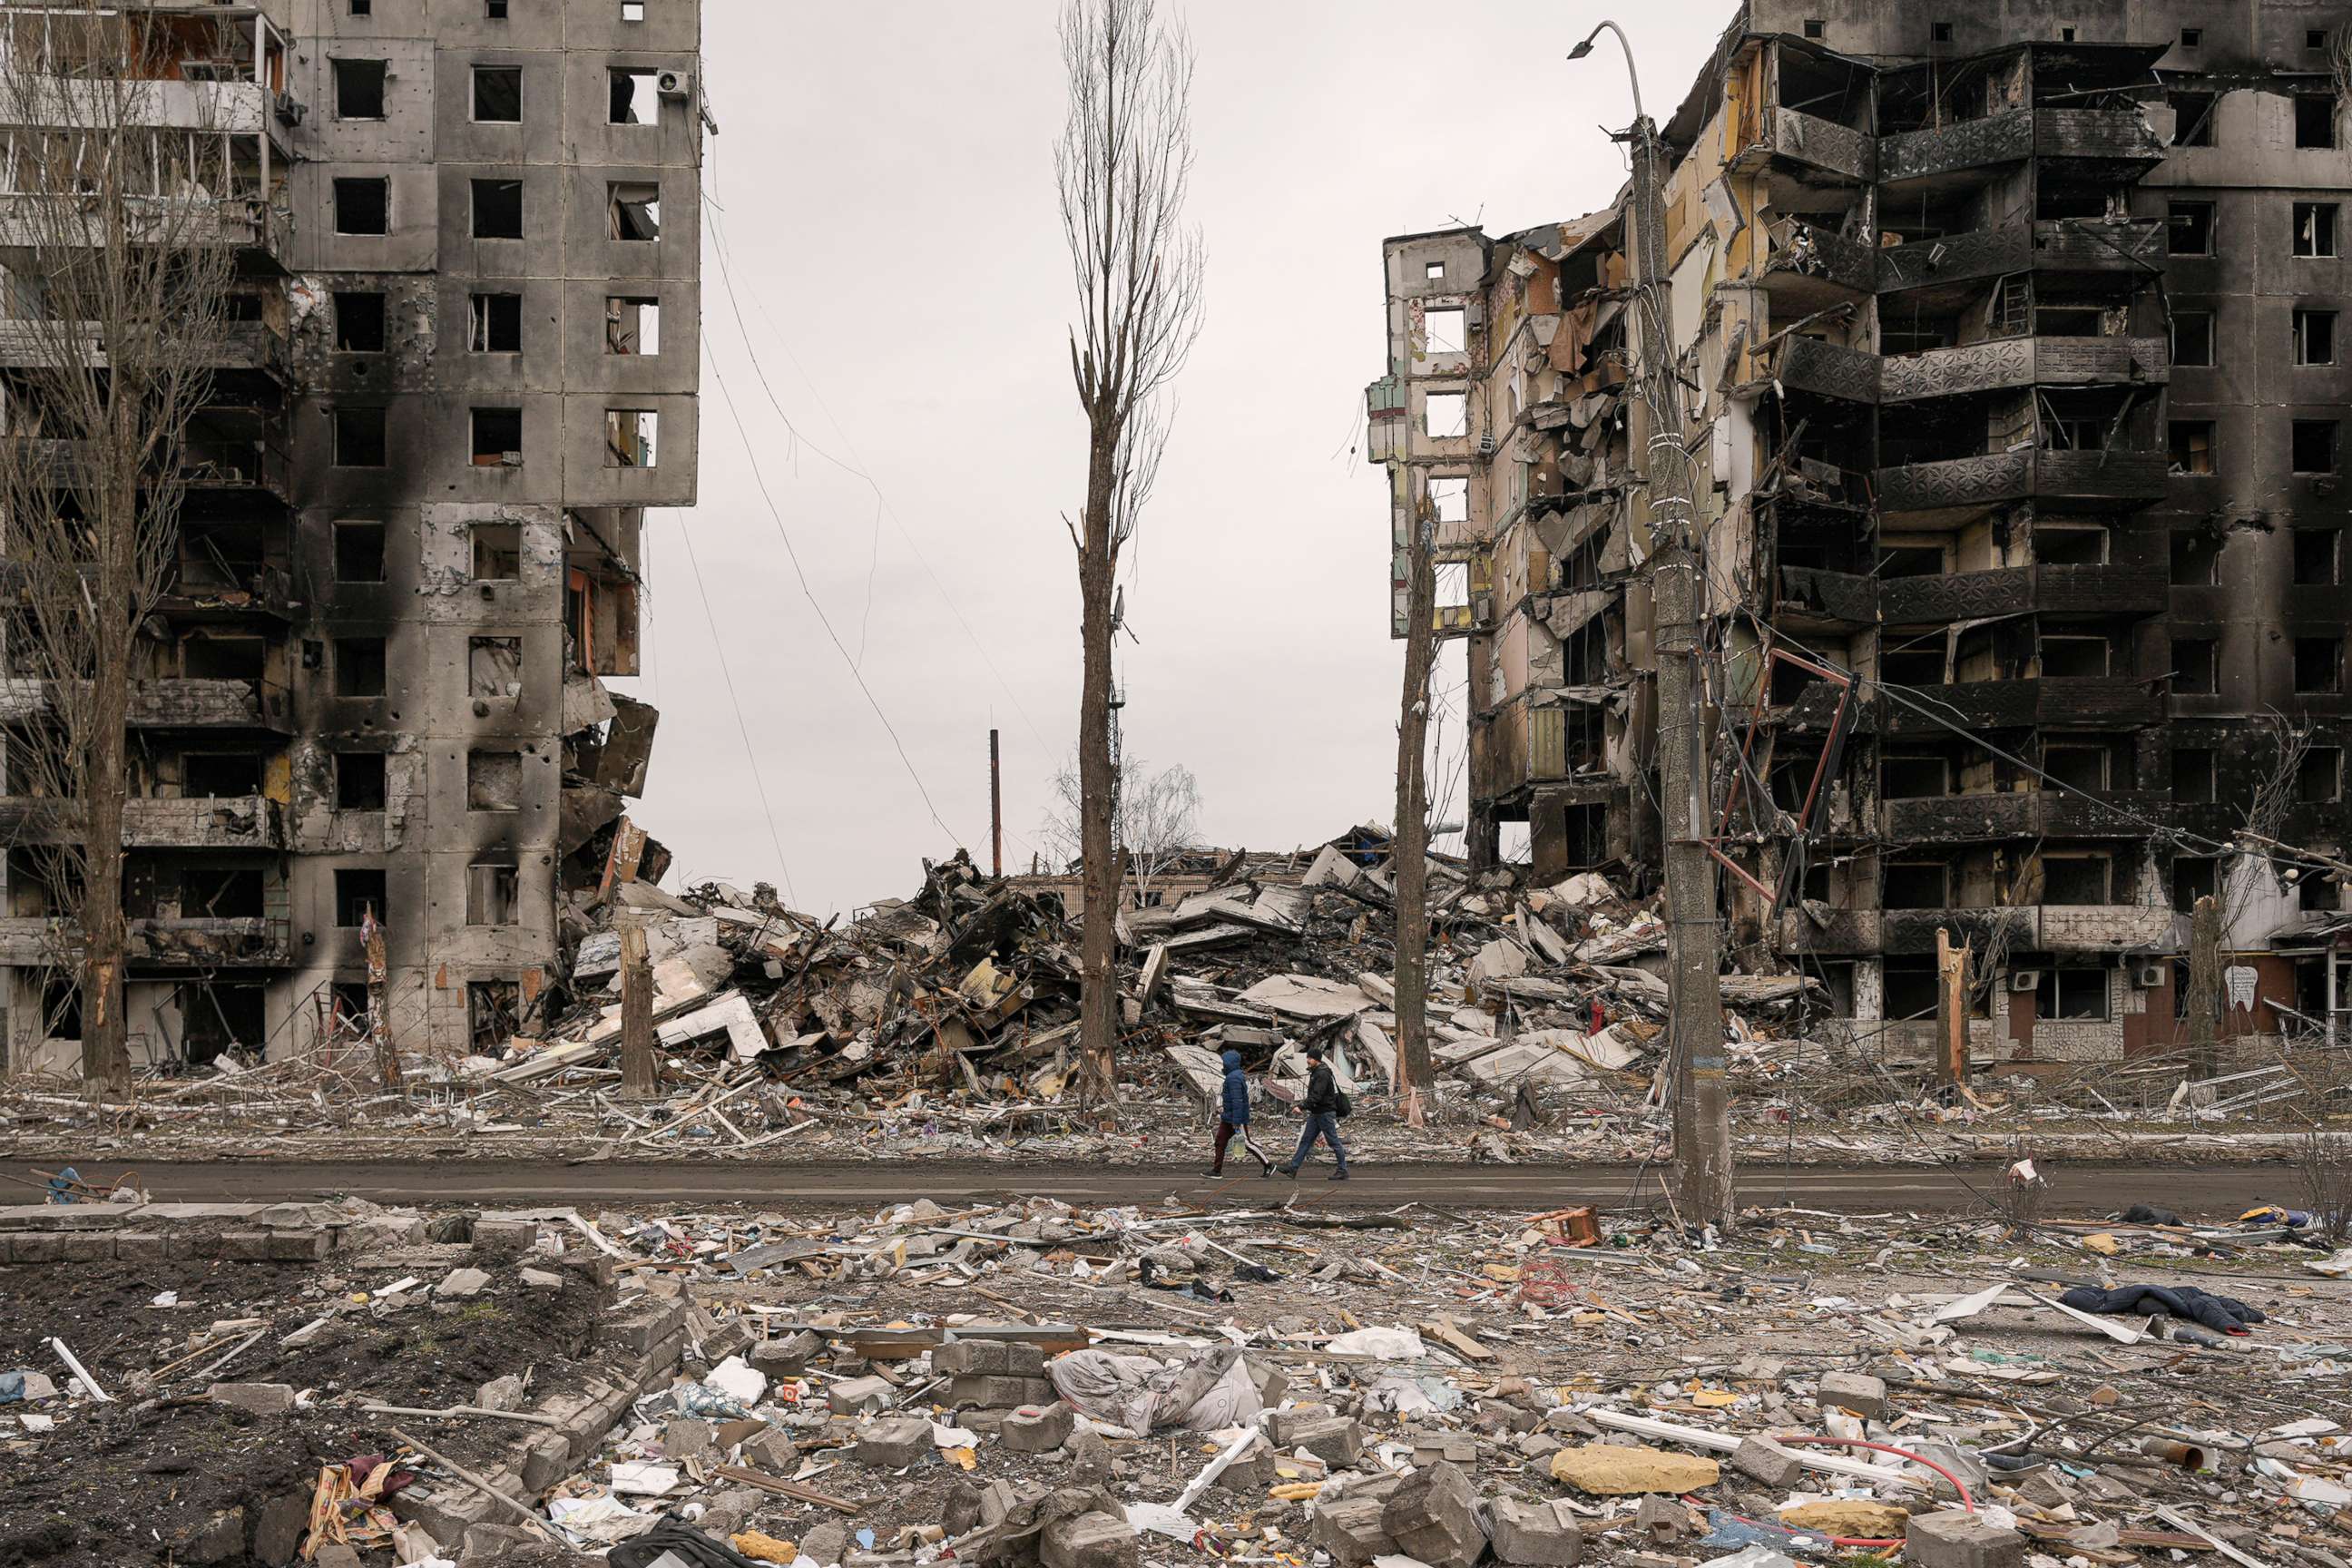 PHOTO: People walk by an apartment building destroyed during fighting between Ukrainian and Russian forces in Borodyanka, Ukraine, April 5, 2022.